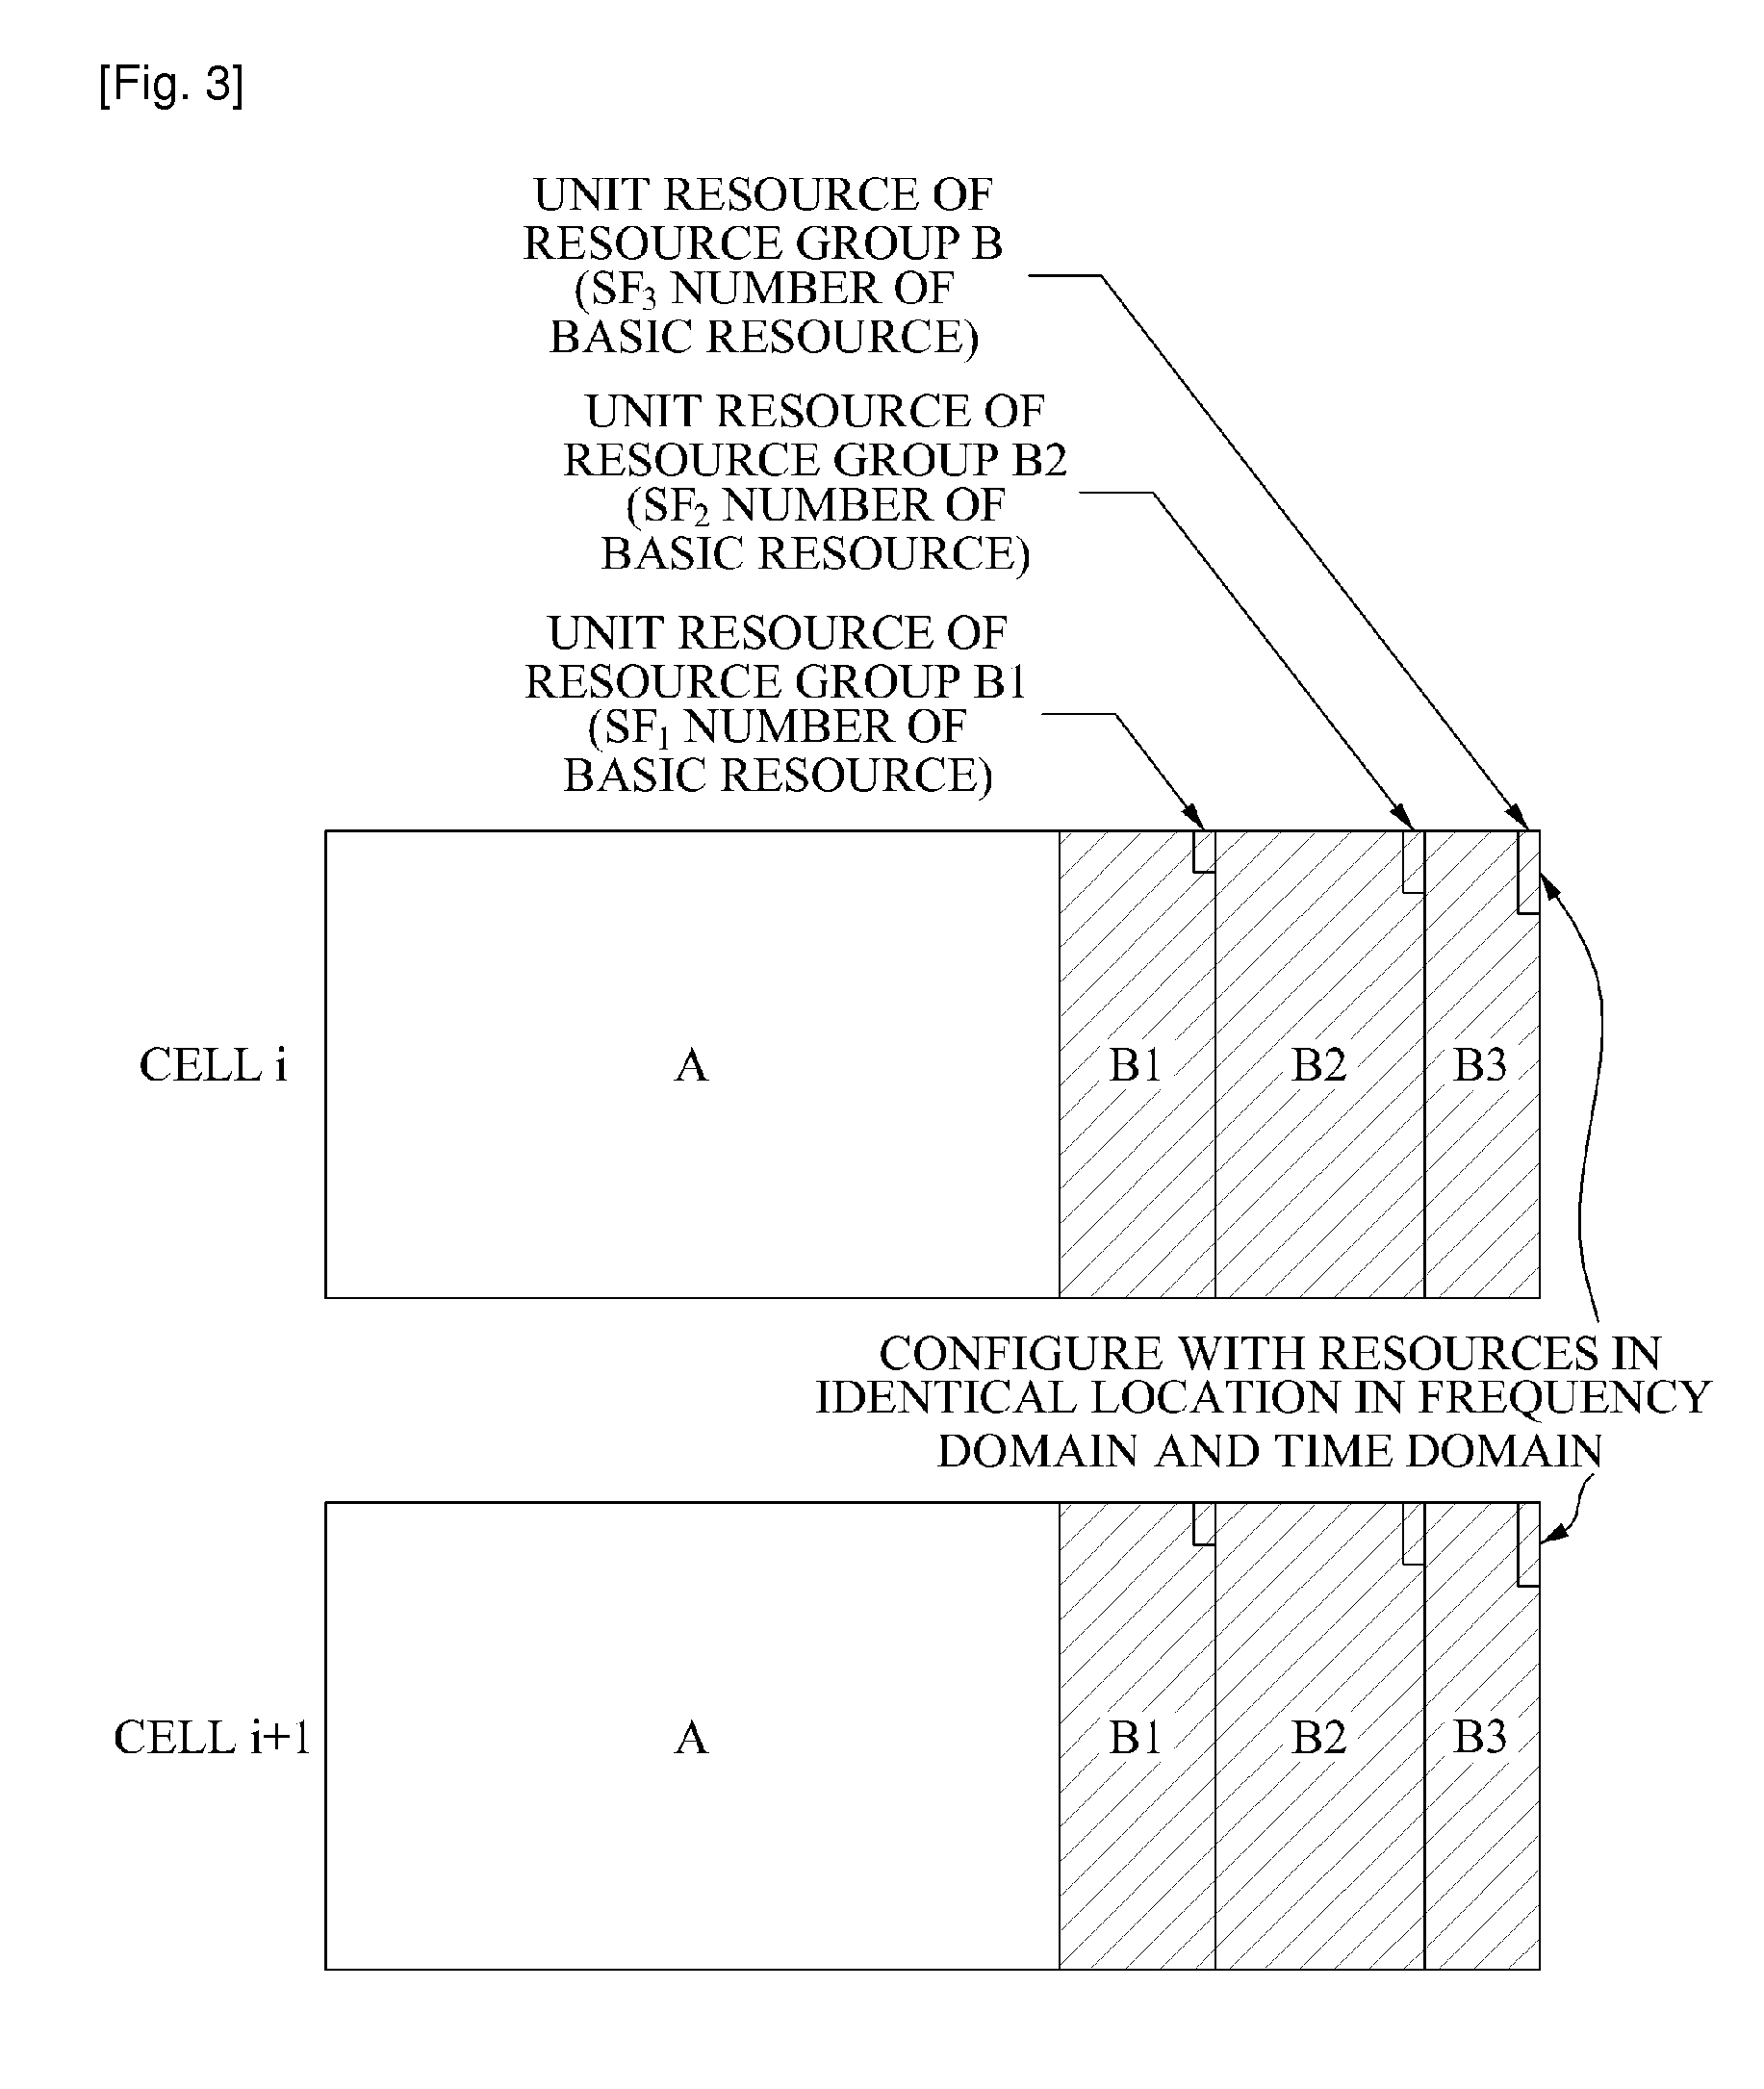 Interference mitigation method in cellular system based on orthogonal frequency division multiple access